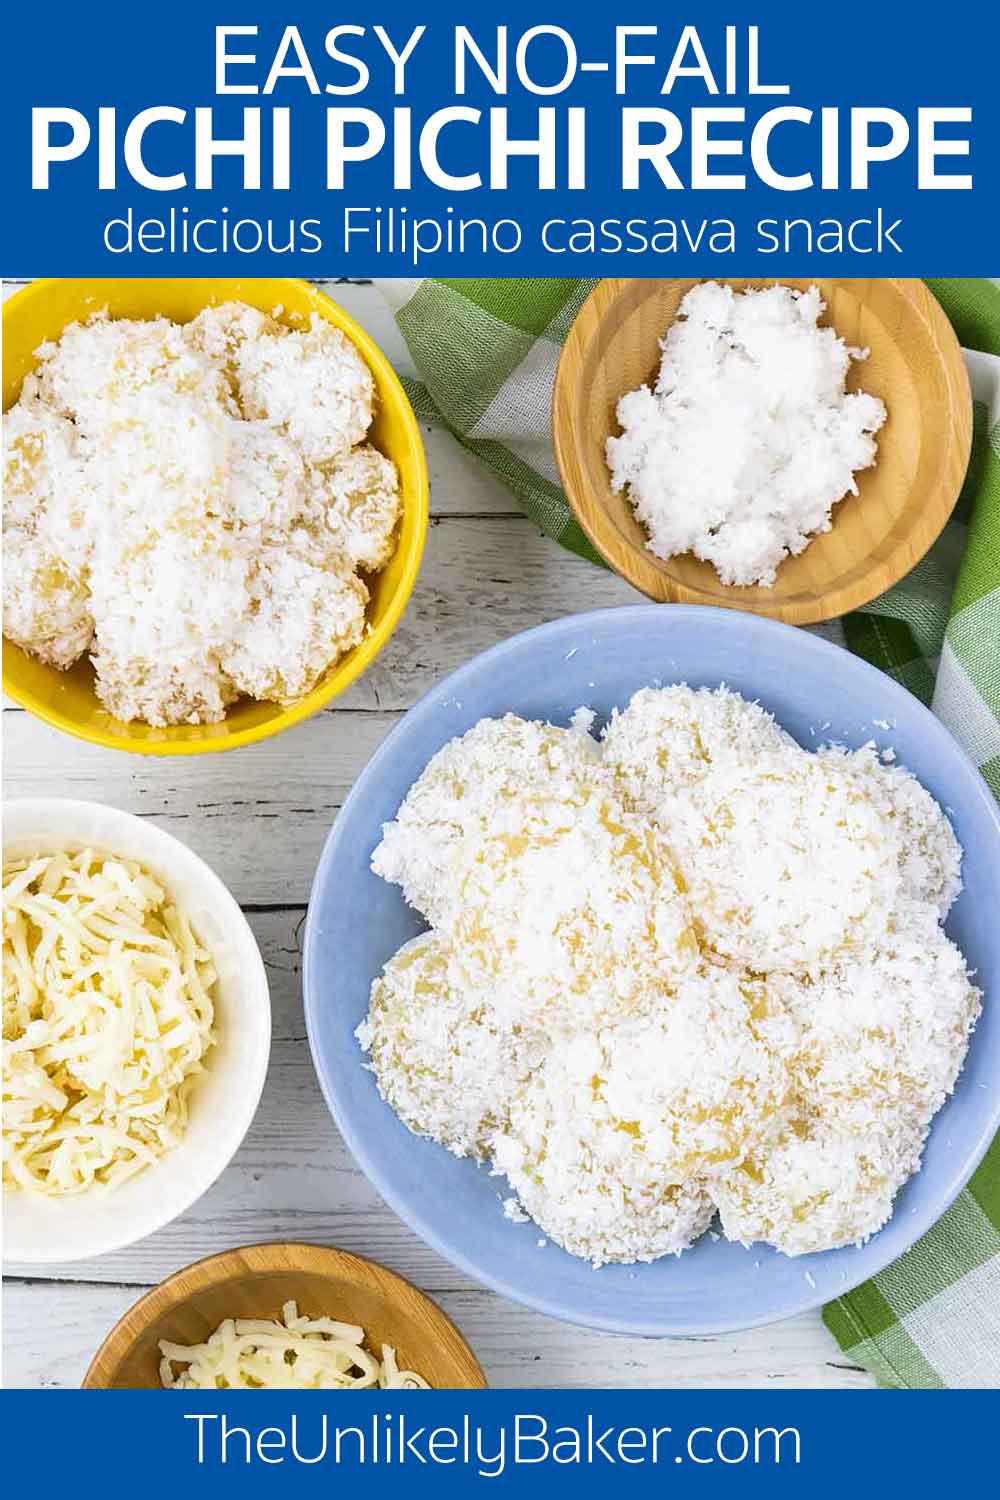 Easy Pichi Pichi Recipe (with step-by-step photos) - The Unlikely Baker